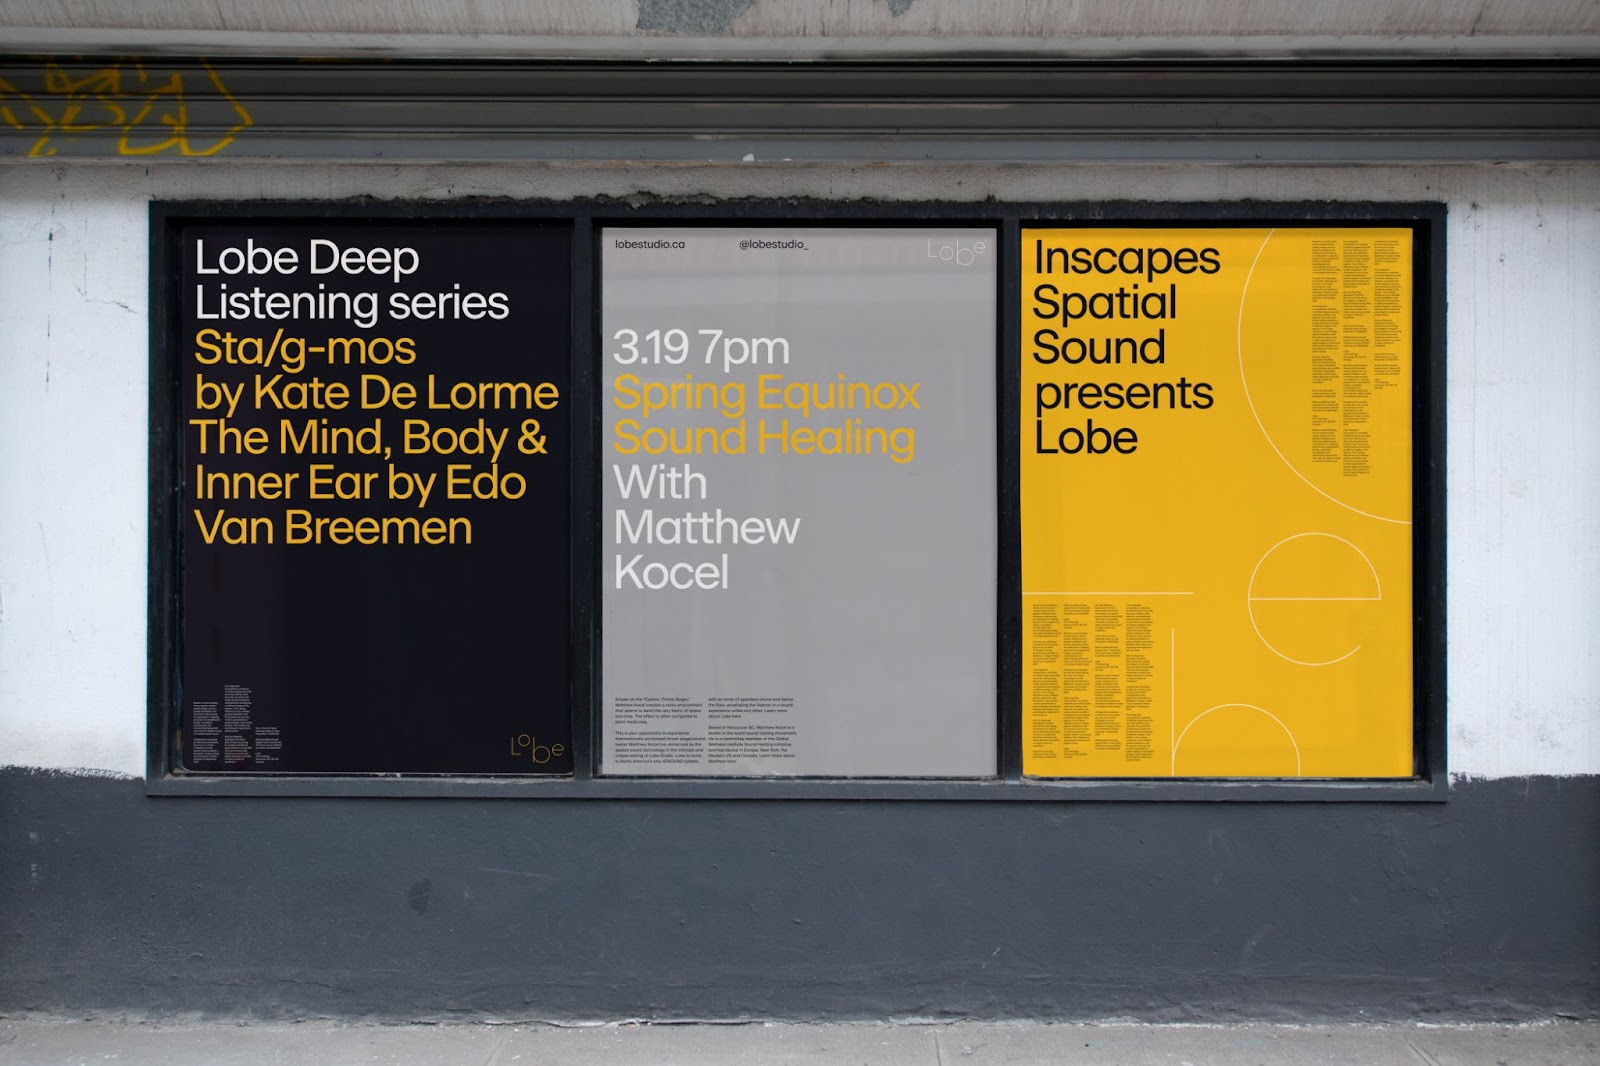 branding and visual identity part of the post — Sonic Symphony: Fay Translates Lobe's Aural Art into Visual Branding